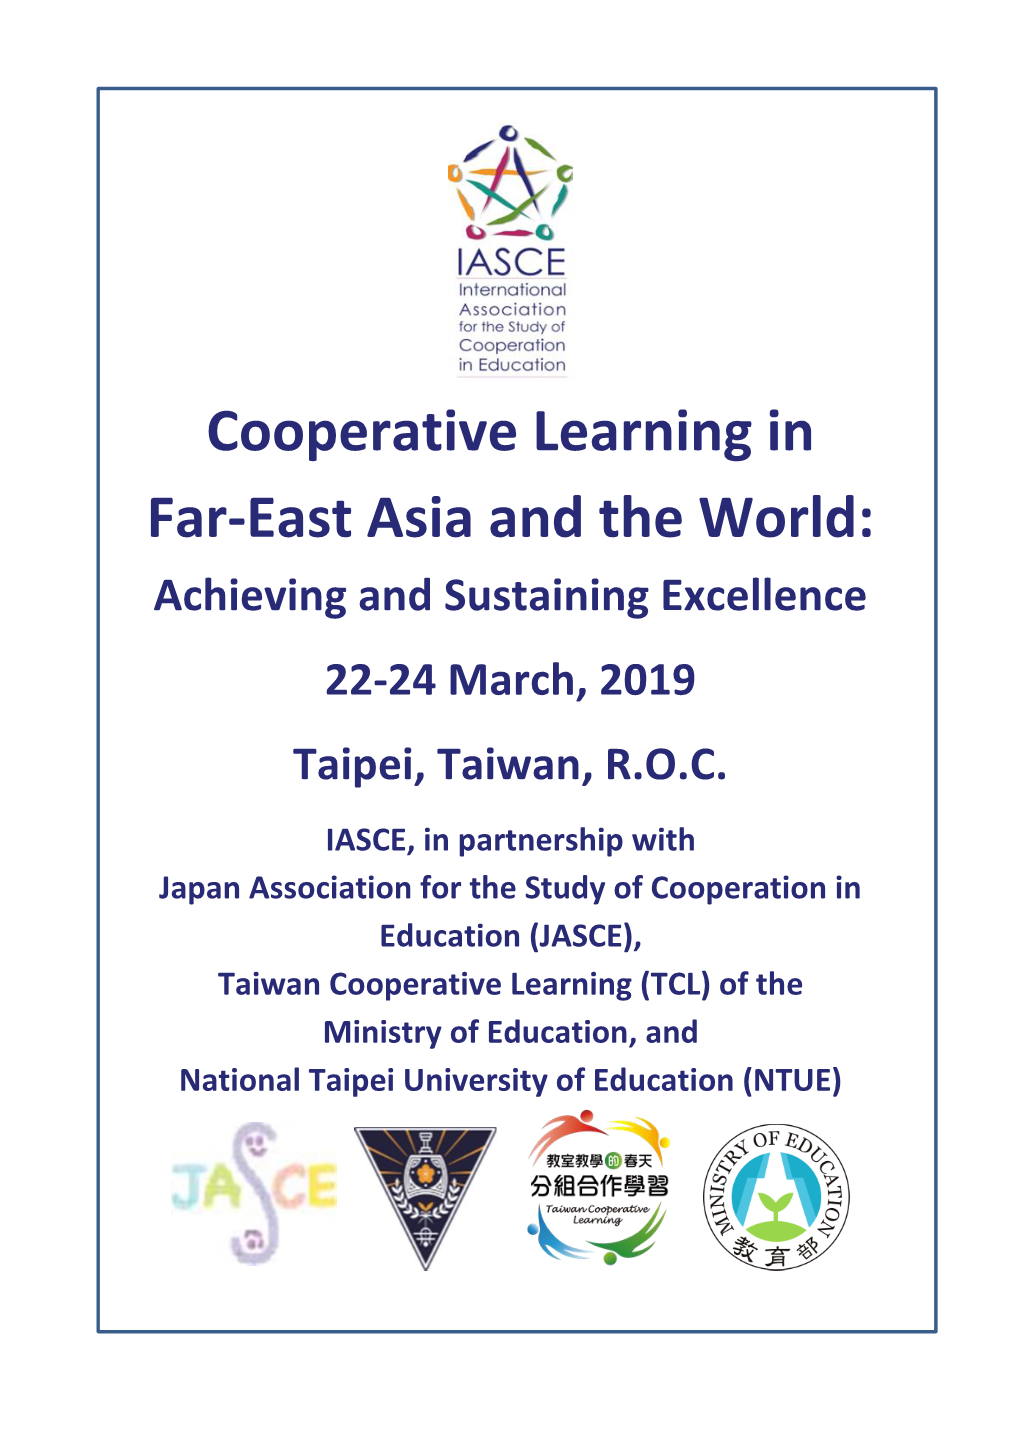 Cooperative Learning in Far-East Asia and the World: Achieving and Sustaining Excellence